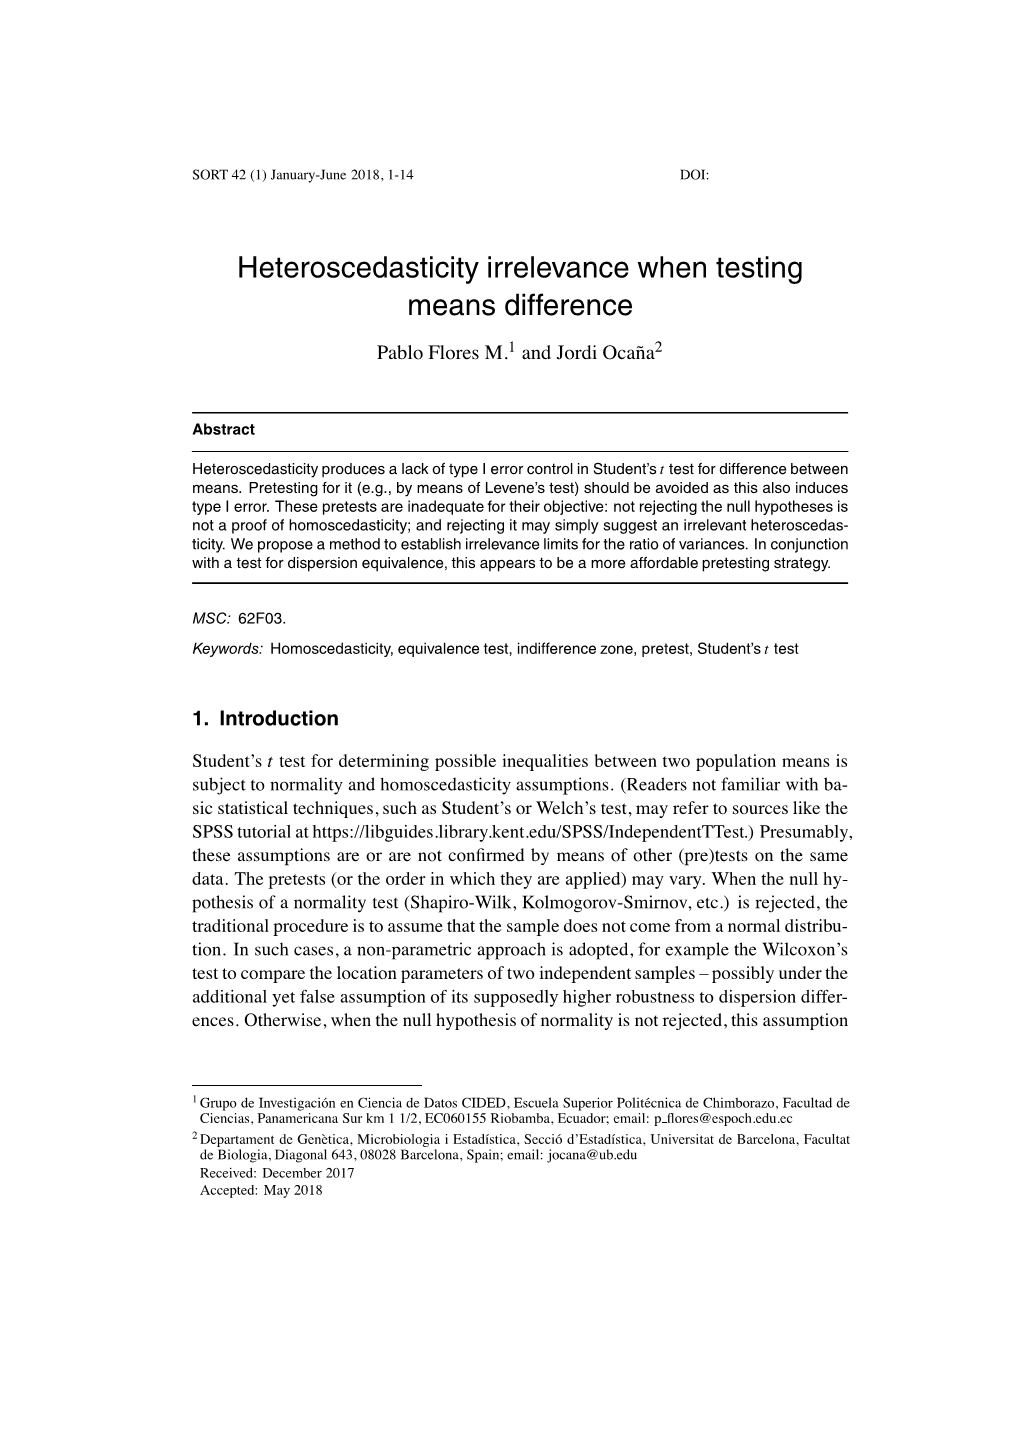 Heteroscedasticity Irrelevance When Testing Means Difference